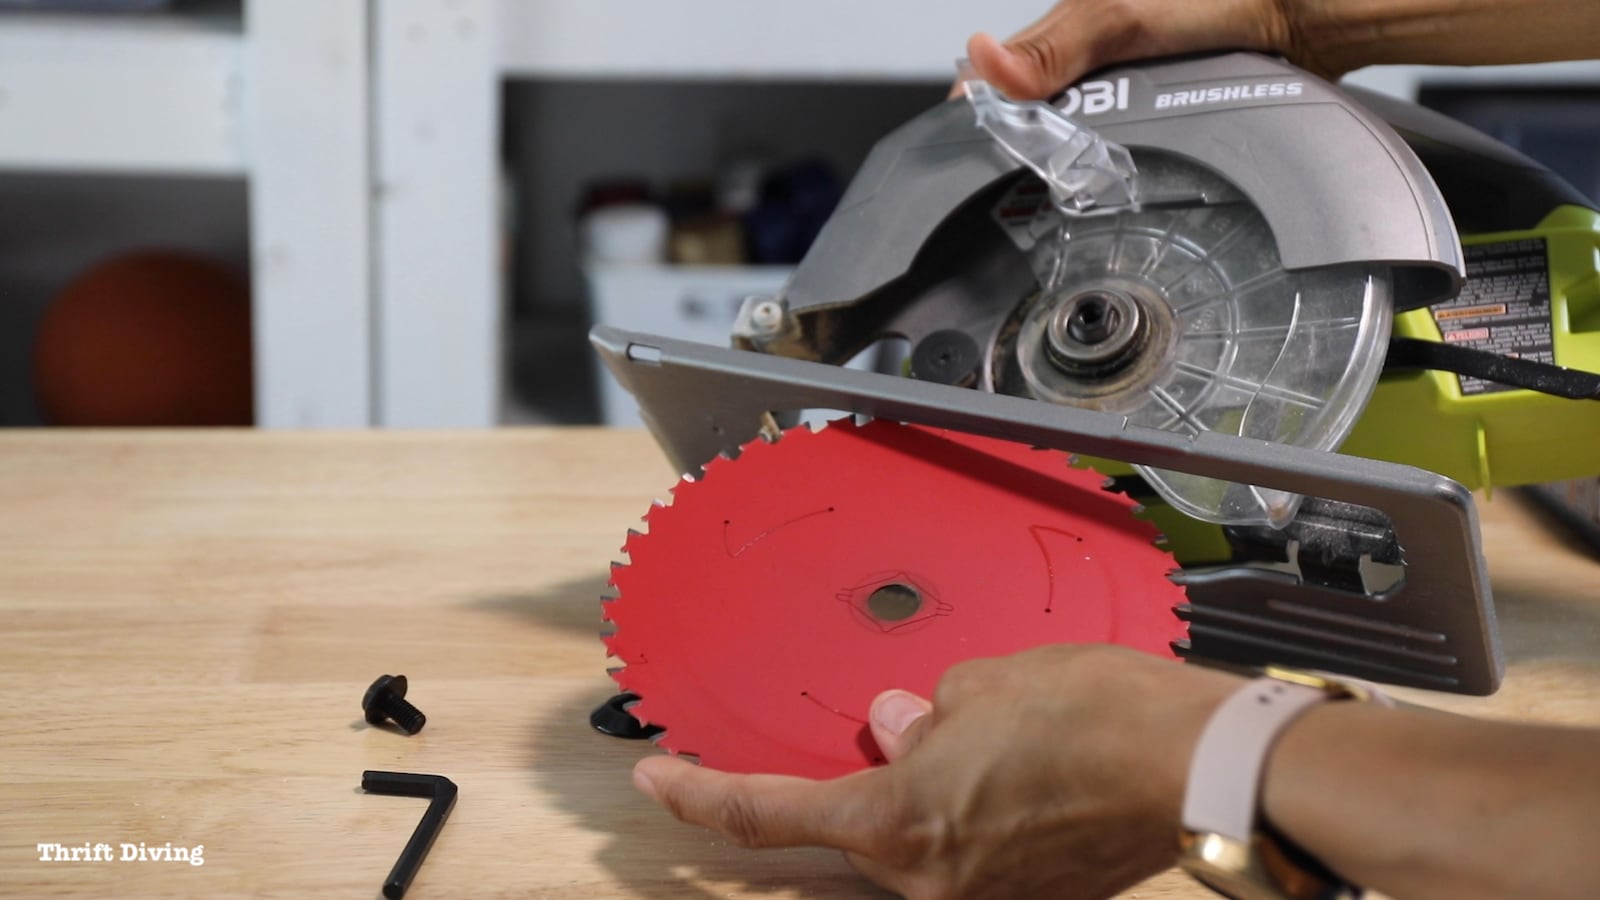 How to change a circular saw blade: Be sure that the blade is cutting in an upstroke manner and that the blade is rotating according to the arrow on the blade - Thrift Diving.